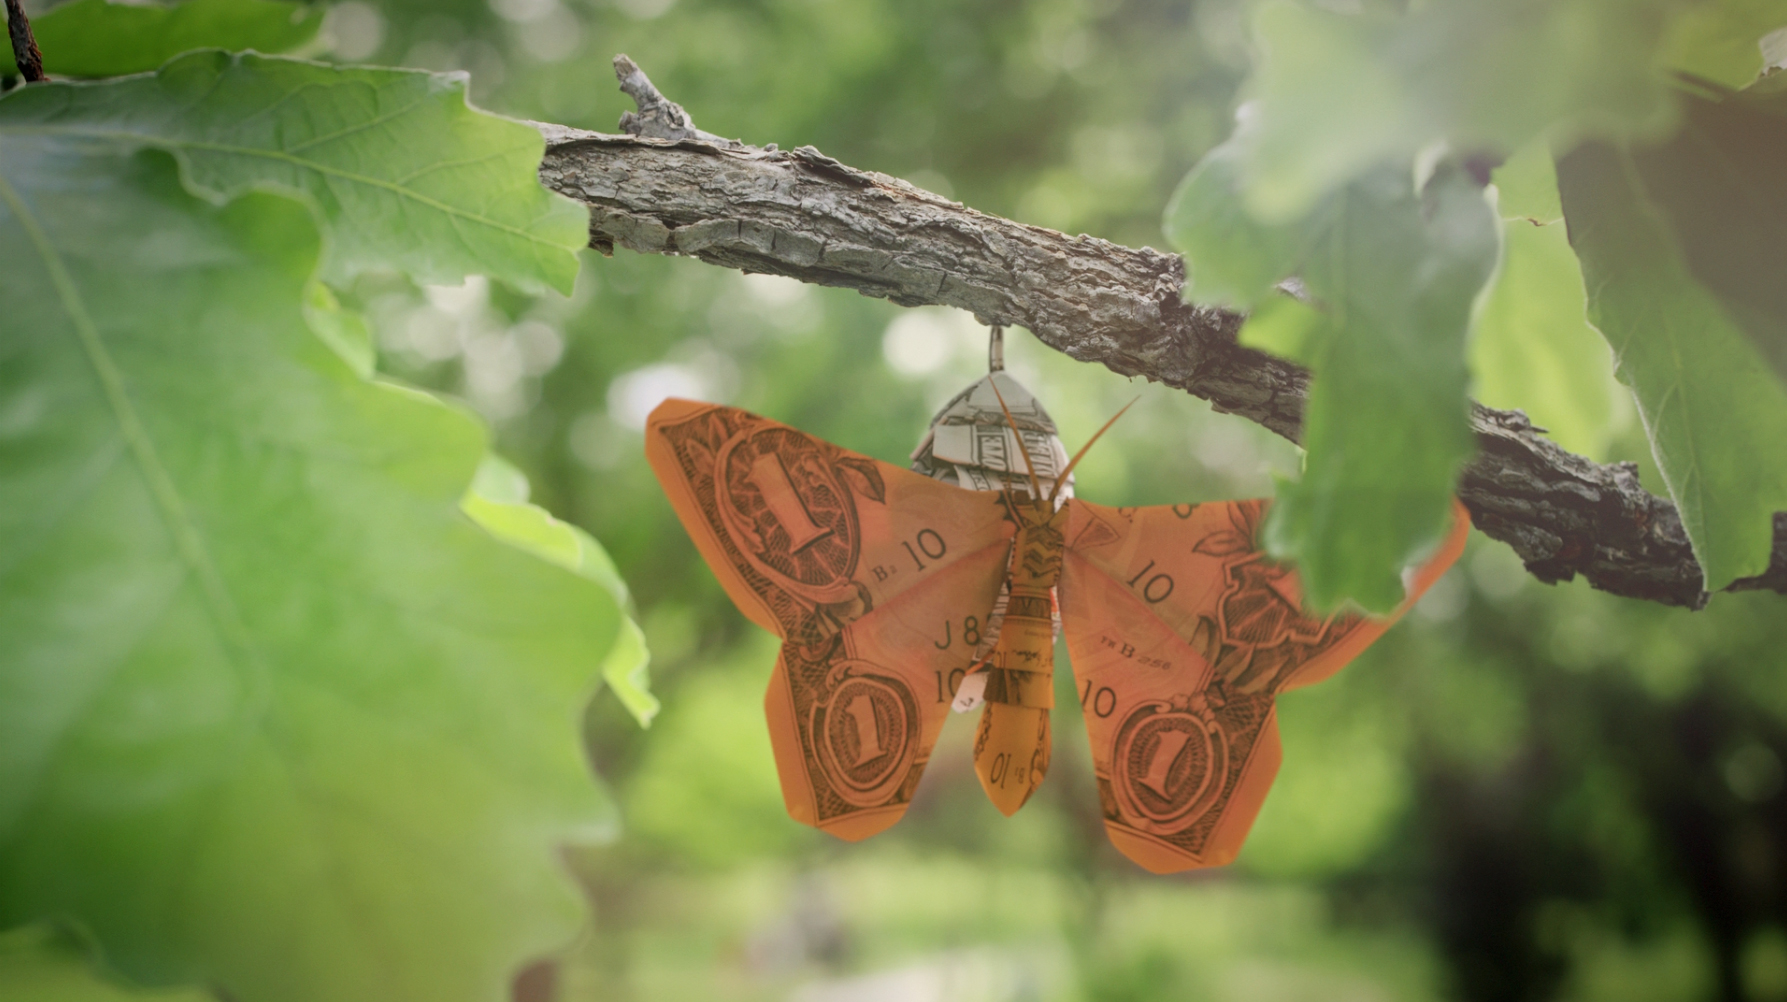 Voya Financial’s new television commercial features the metamorphosis of a dollar bill-patterned caterpillar into an “Orange Money” butterfly.